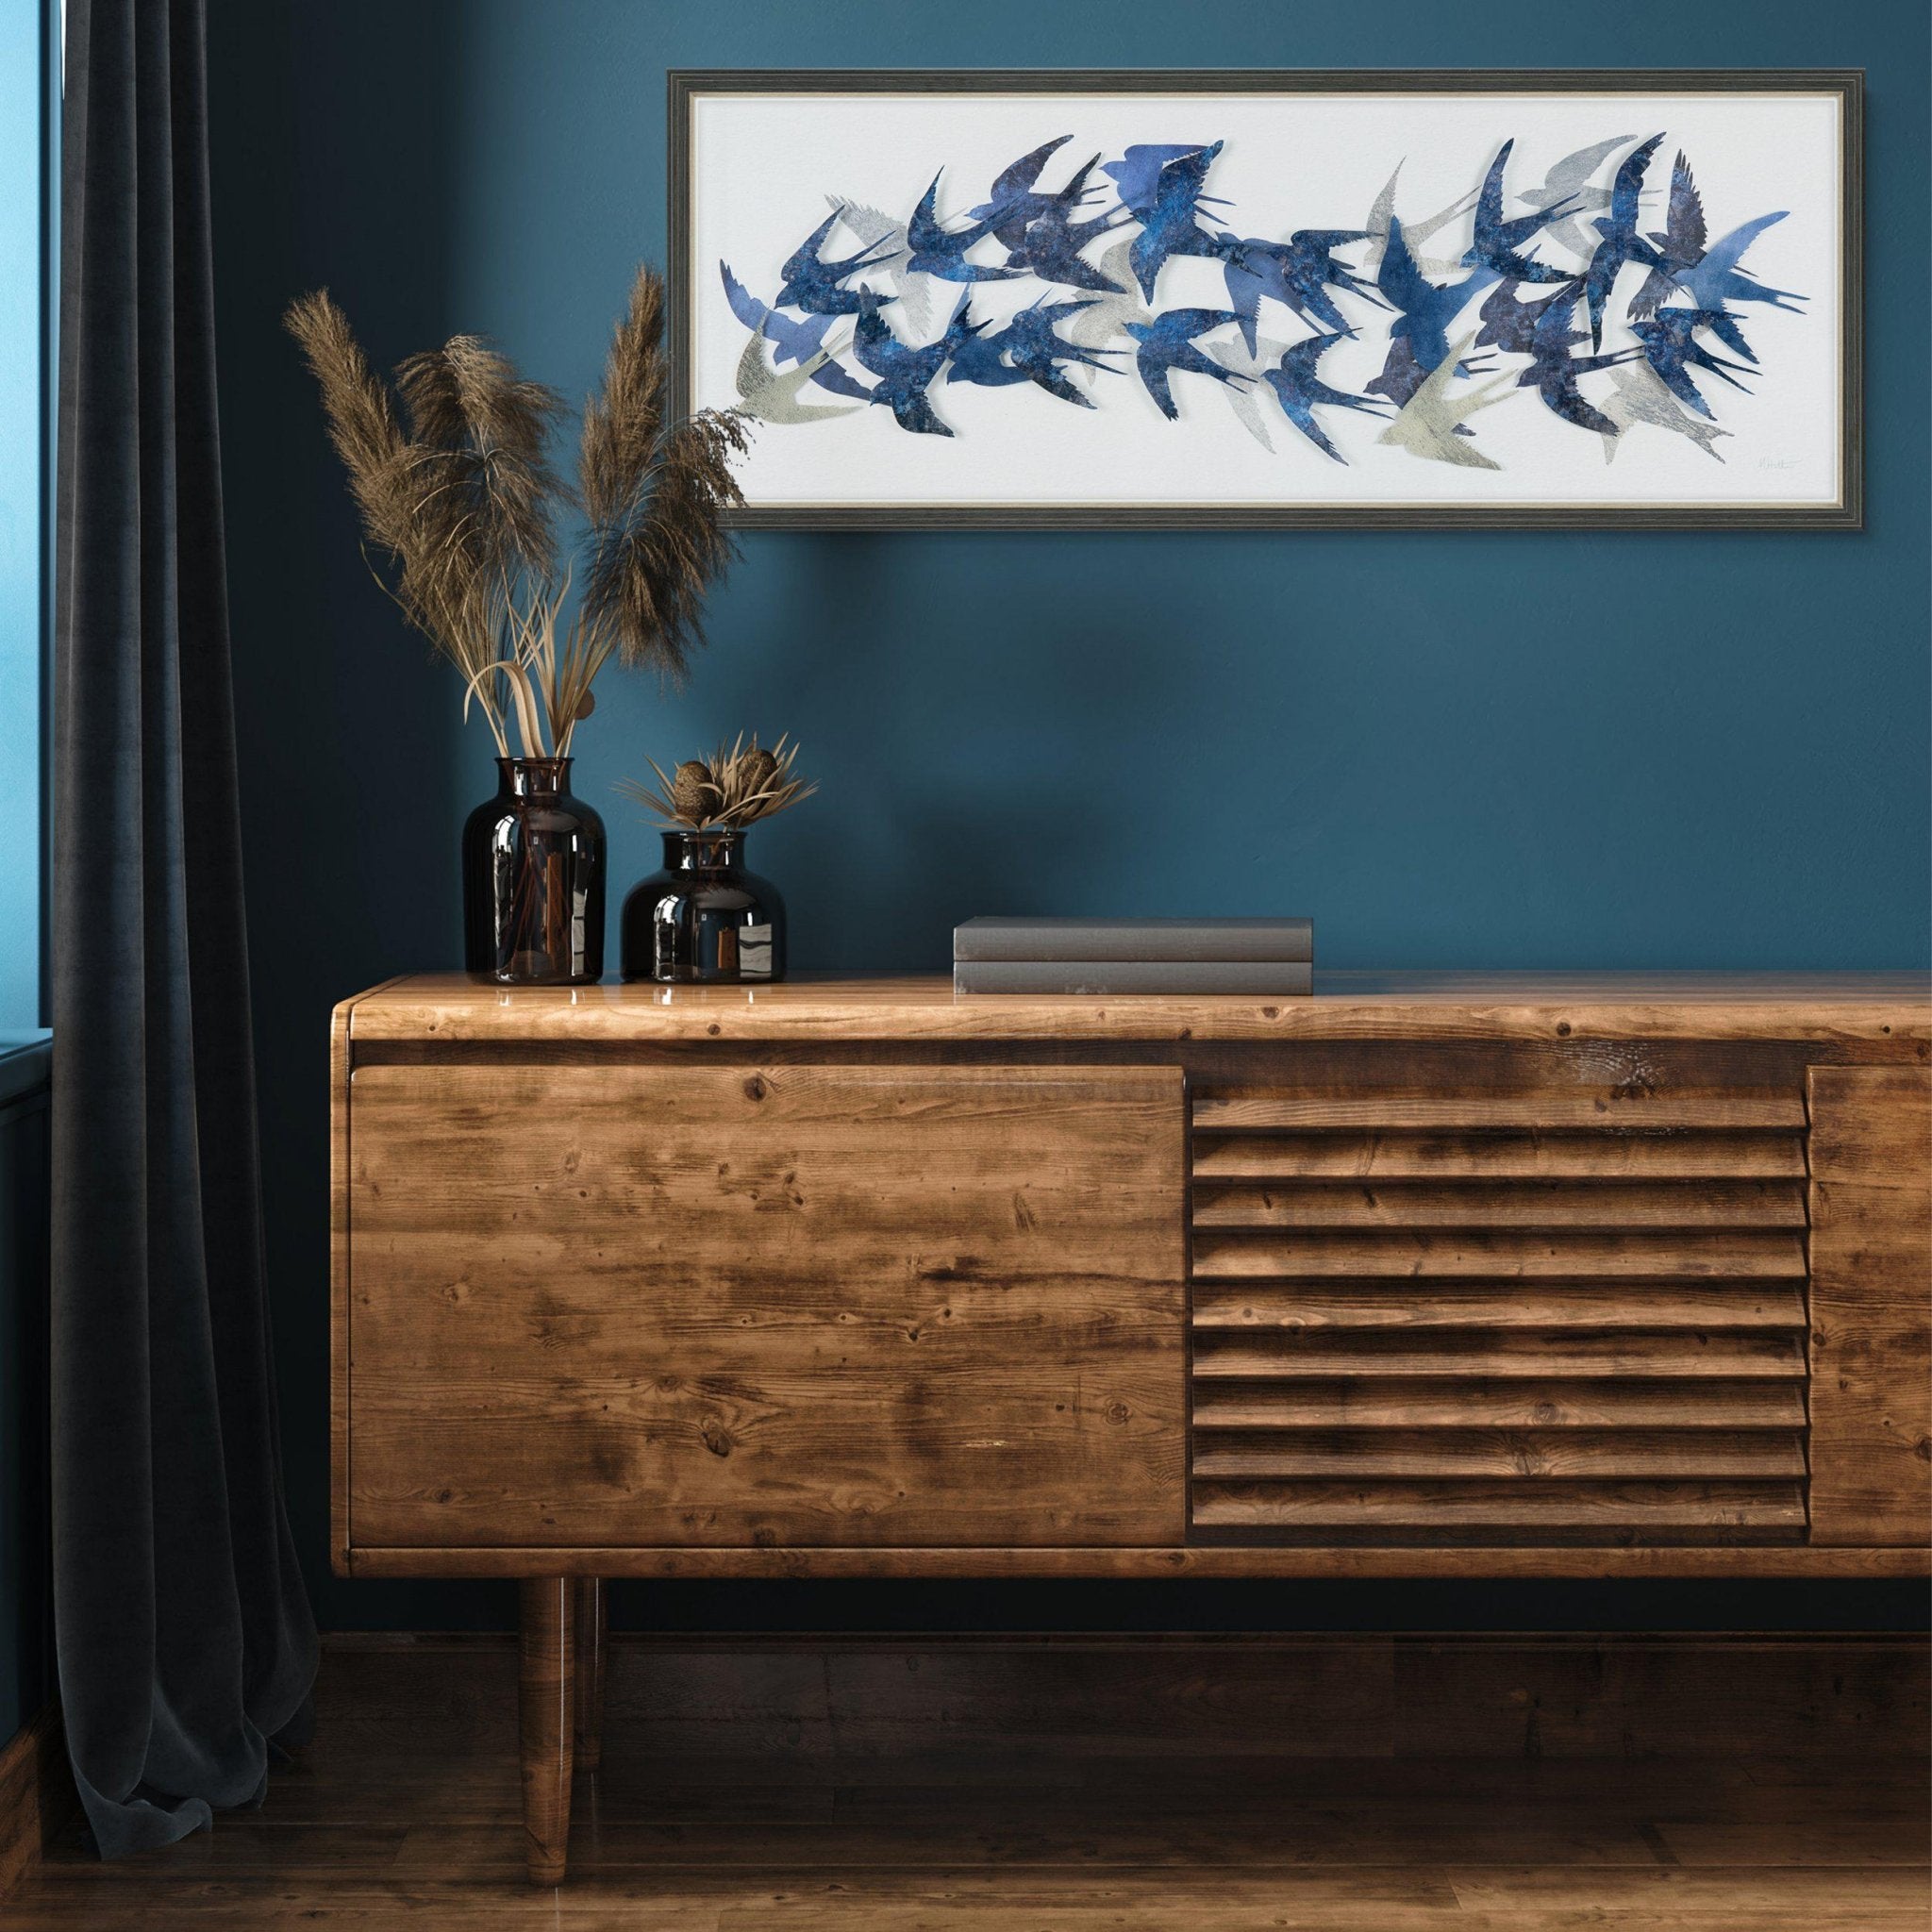 Flock Together by Mark Hather - Duck Barn Interiors